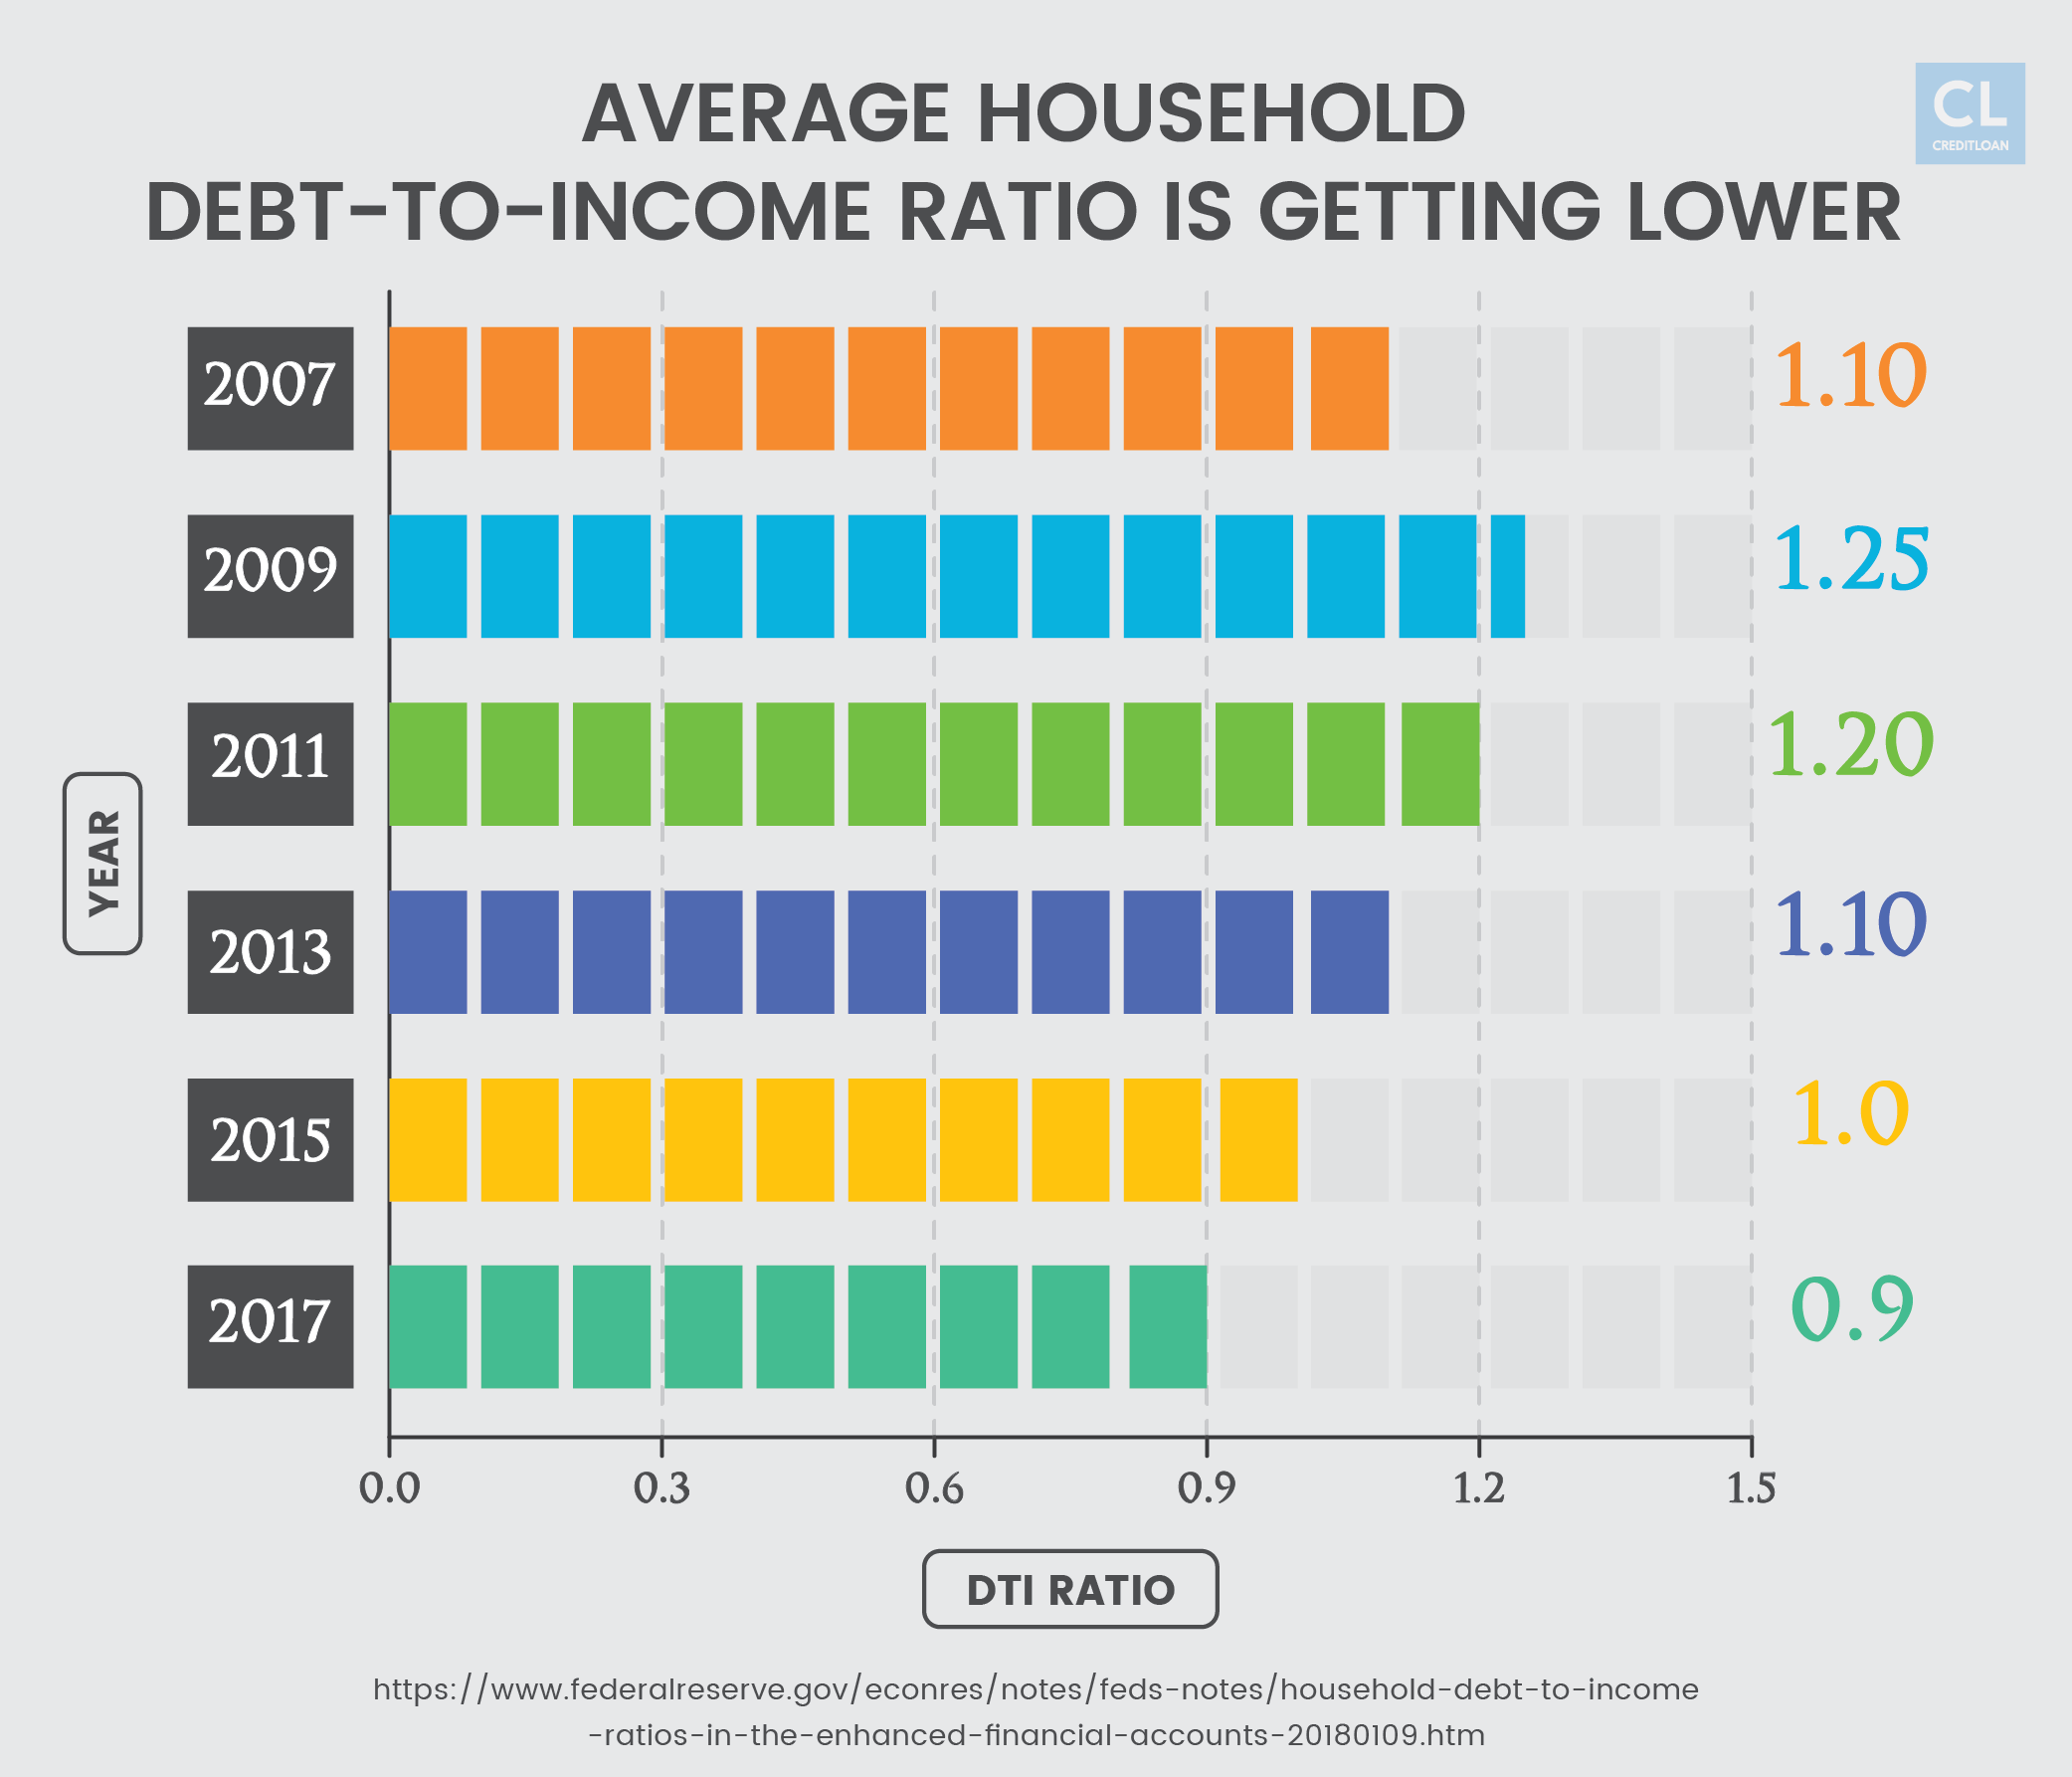 Average Household Debt-to-Income Ratio from 2007-2017